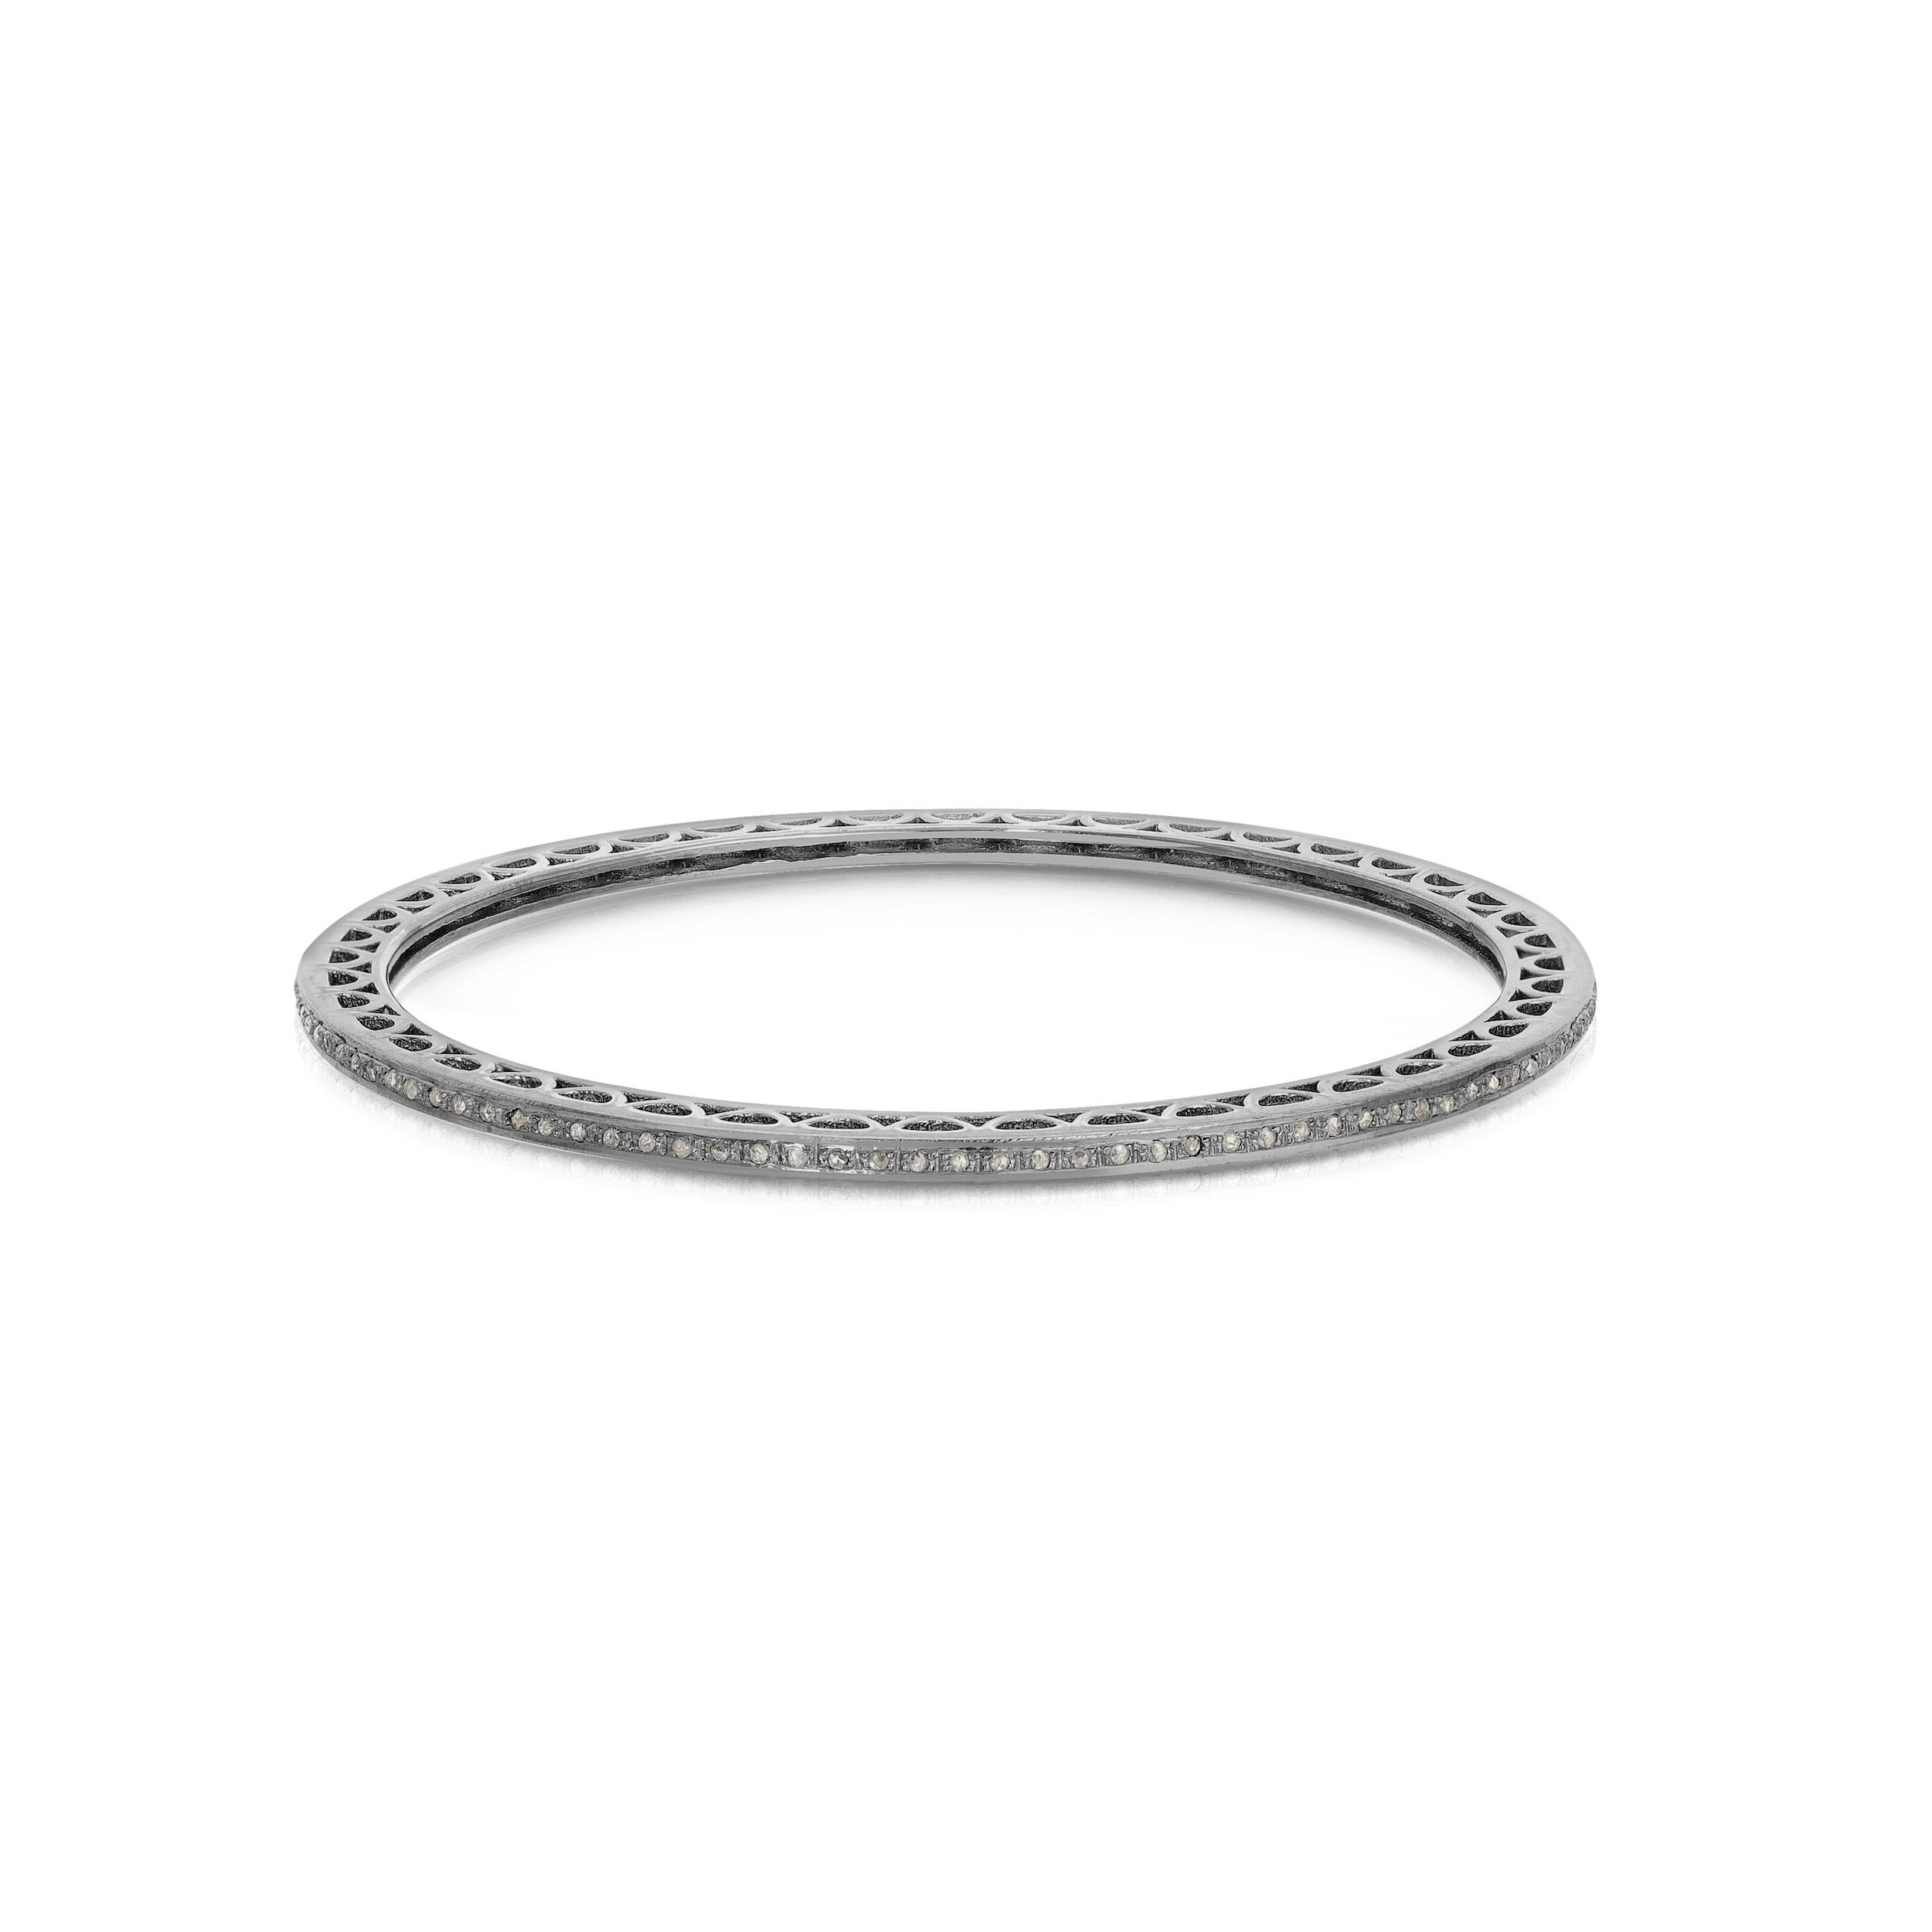 A fully set Diamond bangle featuring .80 Carats of White Diamonds set in Blackened Silver on contemporary bangle of Blackened Oxidized Silver... The ultimate in chic, stylish glamour alone or a perfect contrasting accompaniment to stacks of bangles